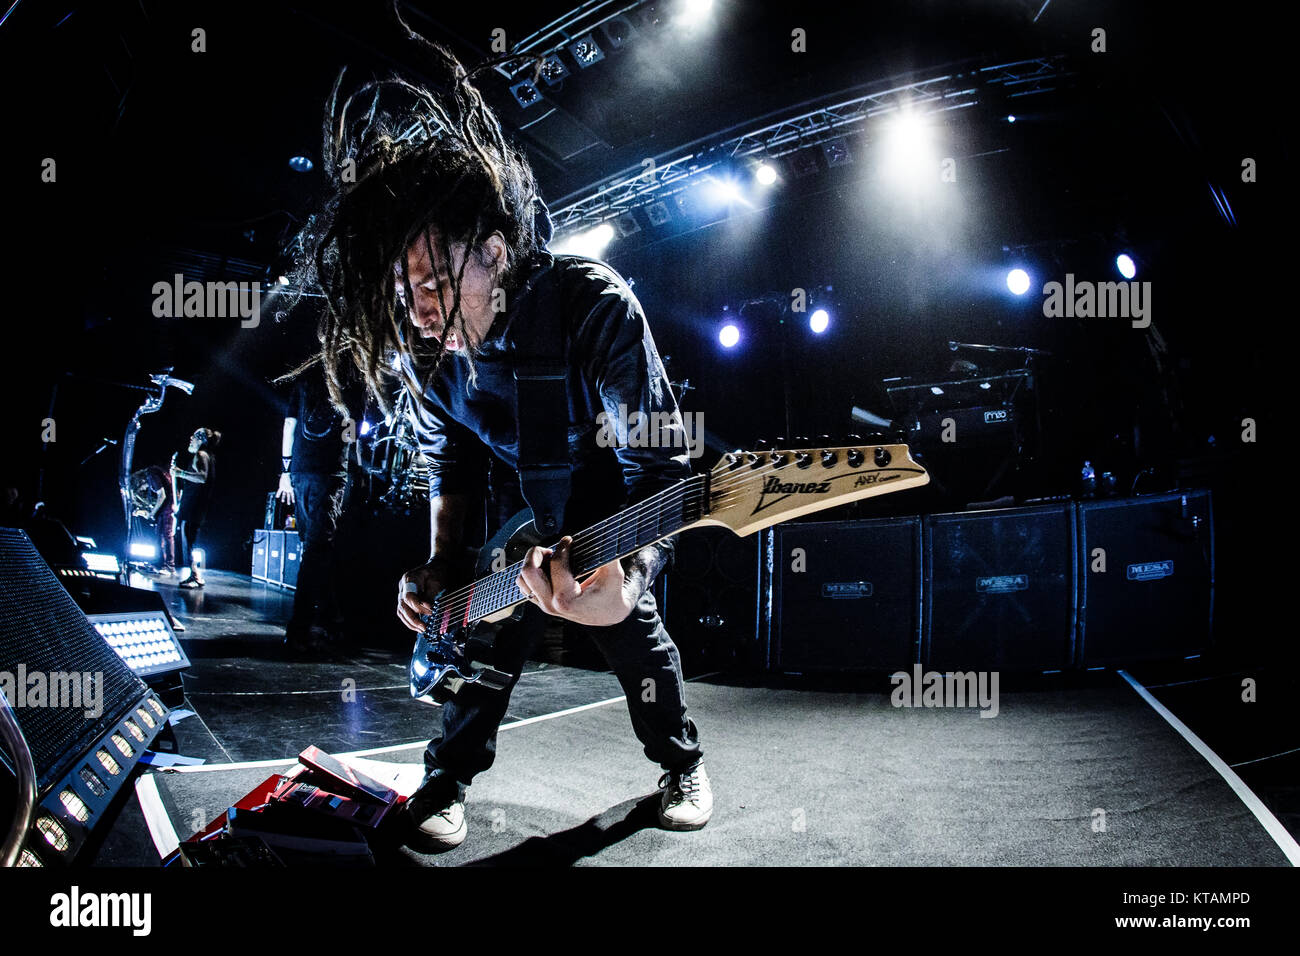 The American nu metal band Korn performs a live concert at Amager Bio in Copenhagen. Here guitarist James Shaffer is seen live on stage. Denmark, 08/05 2014. Stock Photo